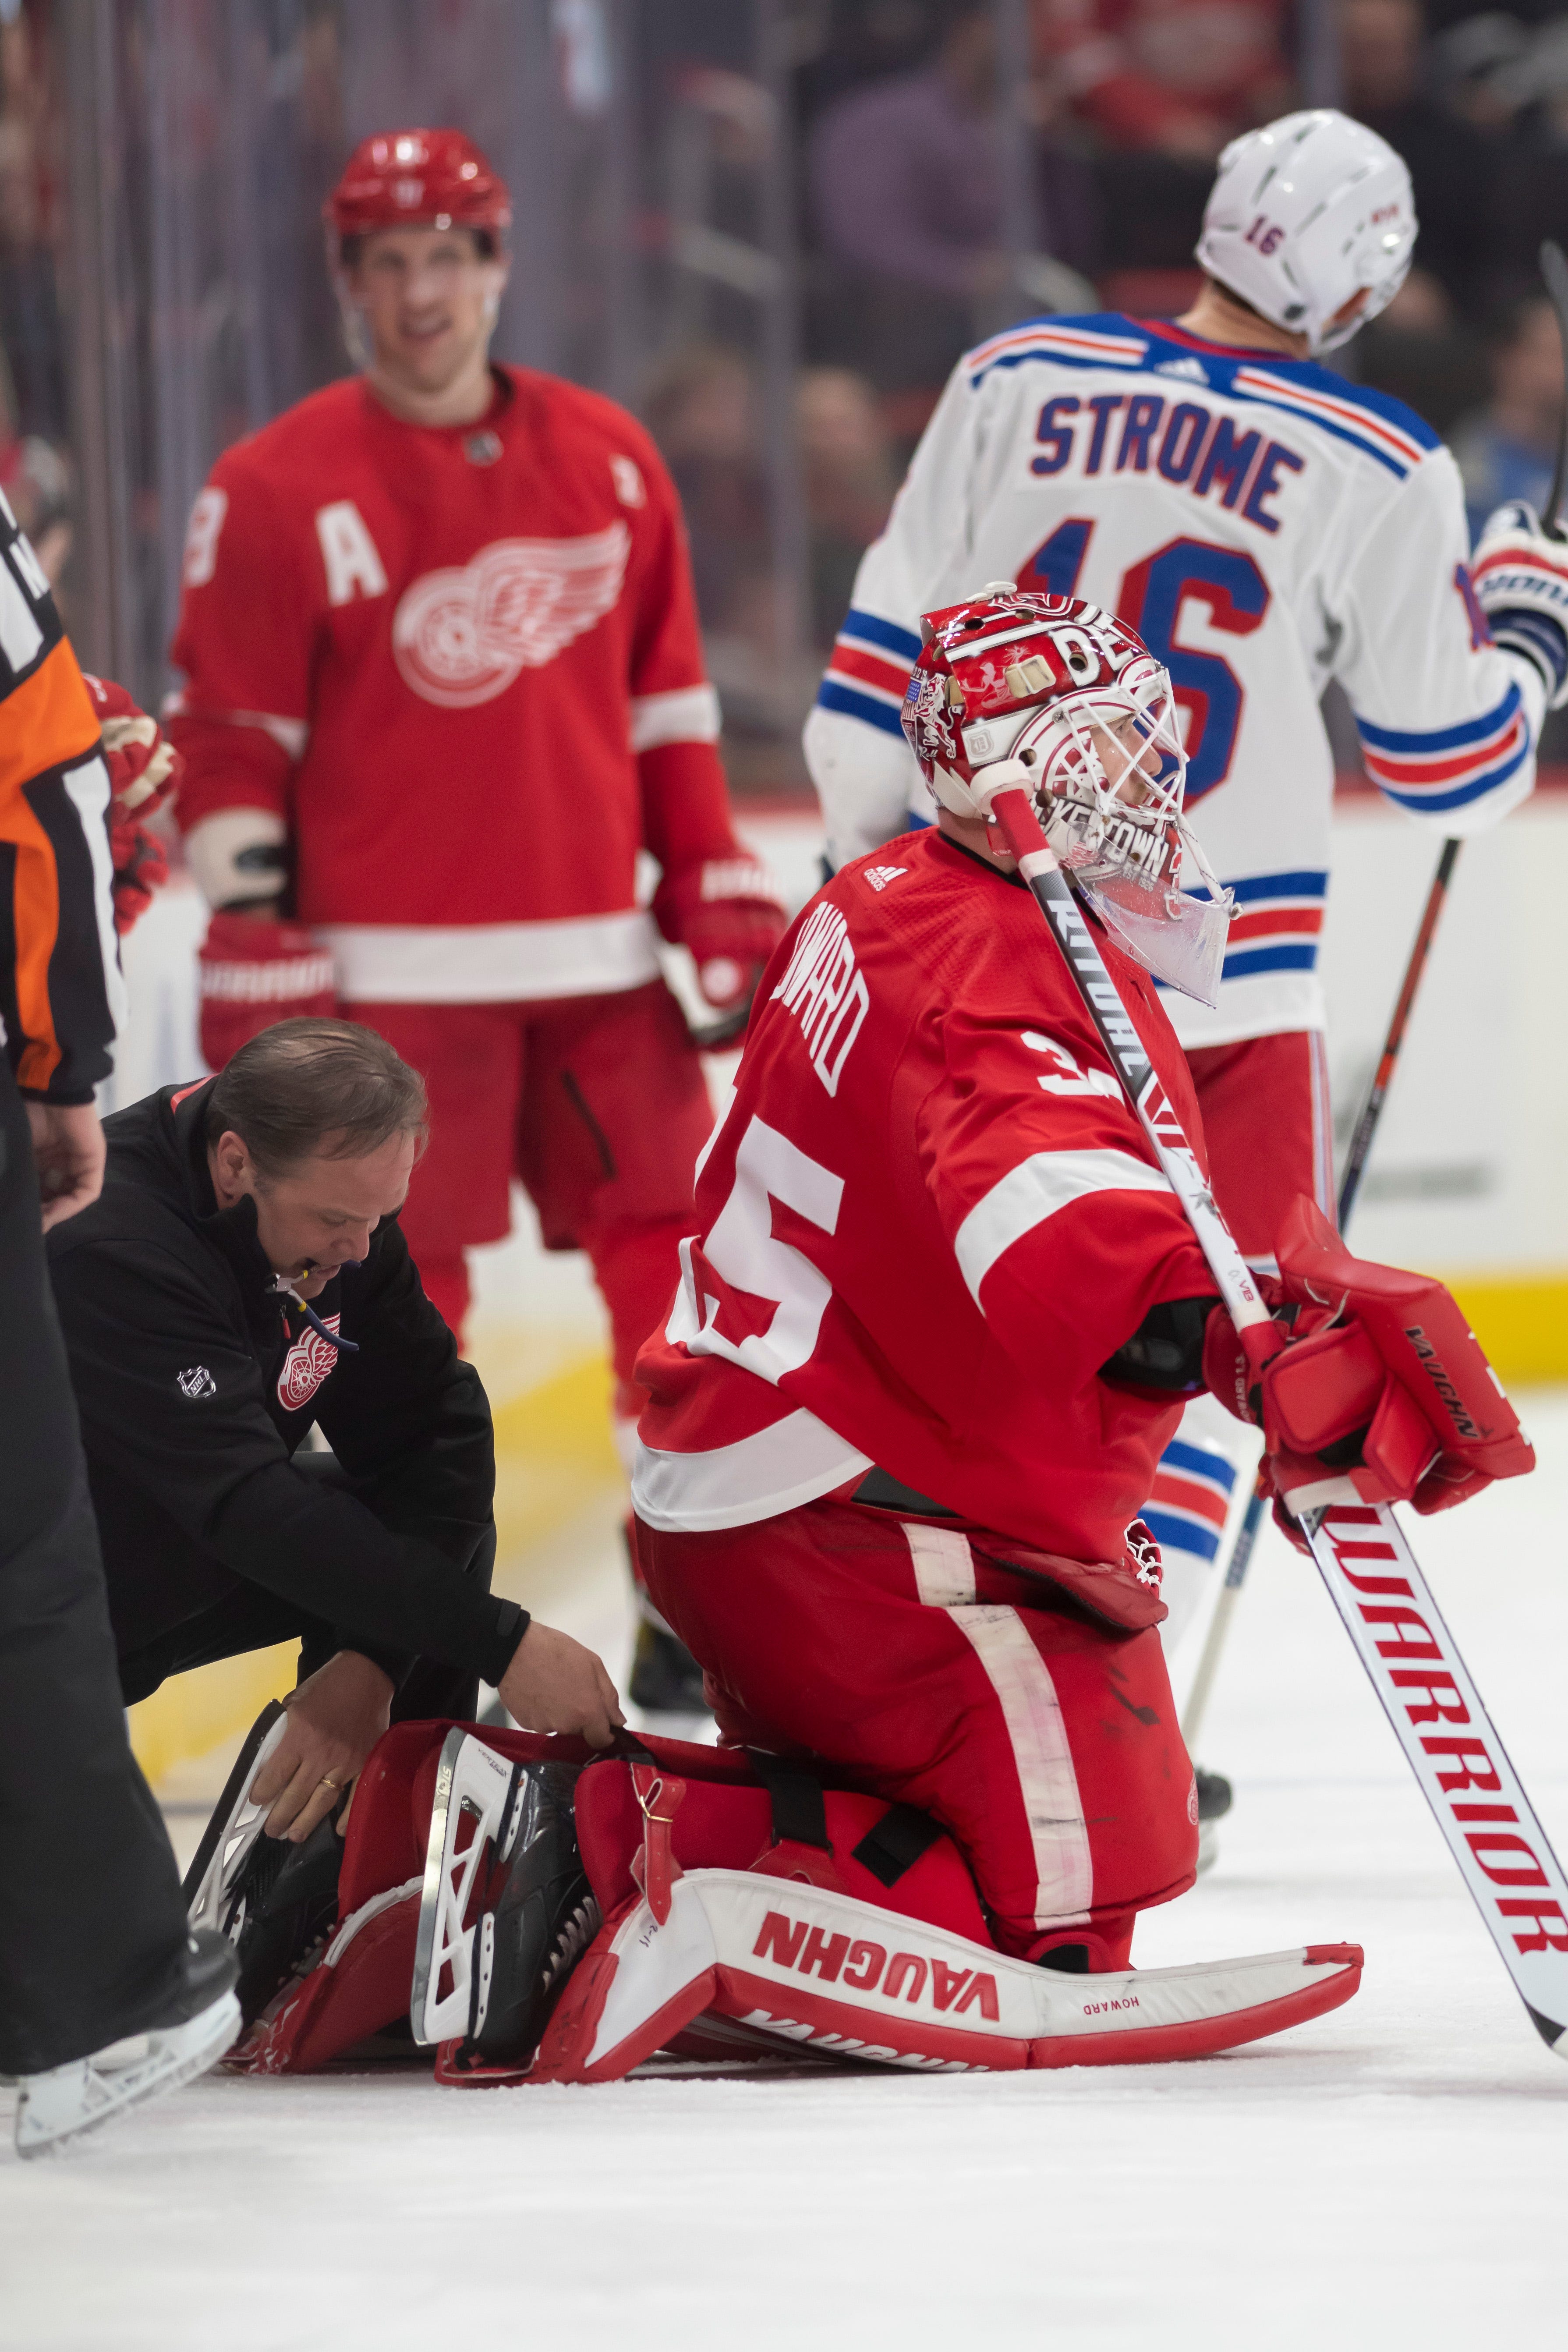 Equipment manager Paul Boyer makes a quick blade change for goaltender Jimmy Howard in the third period.